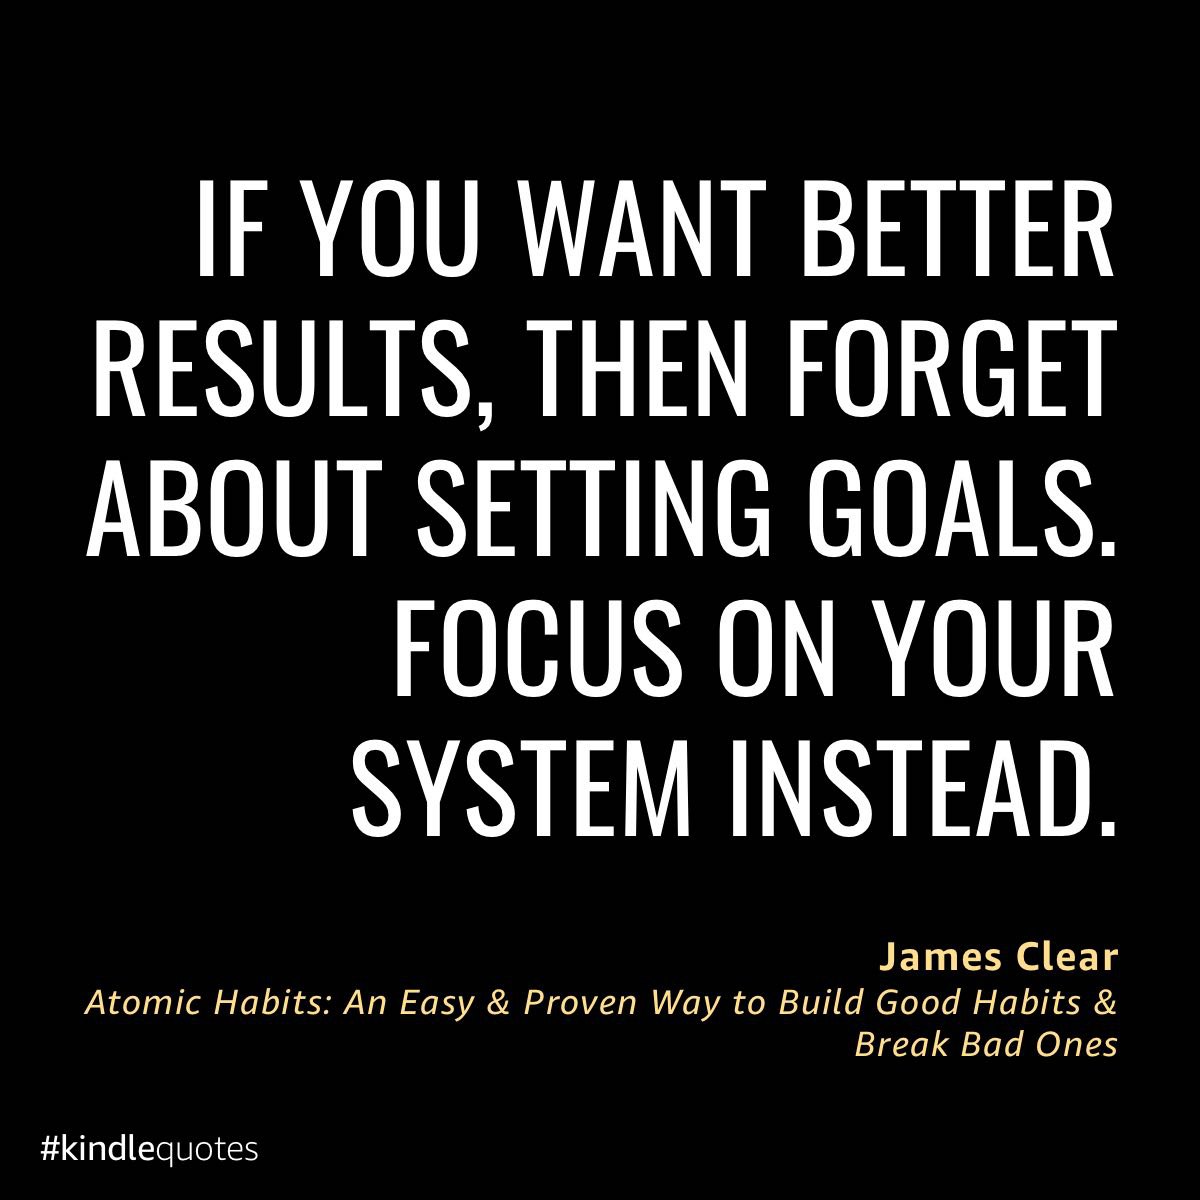 If you whant better results, then forget about setting goals. Focus on your system instead